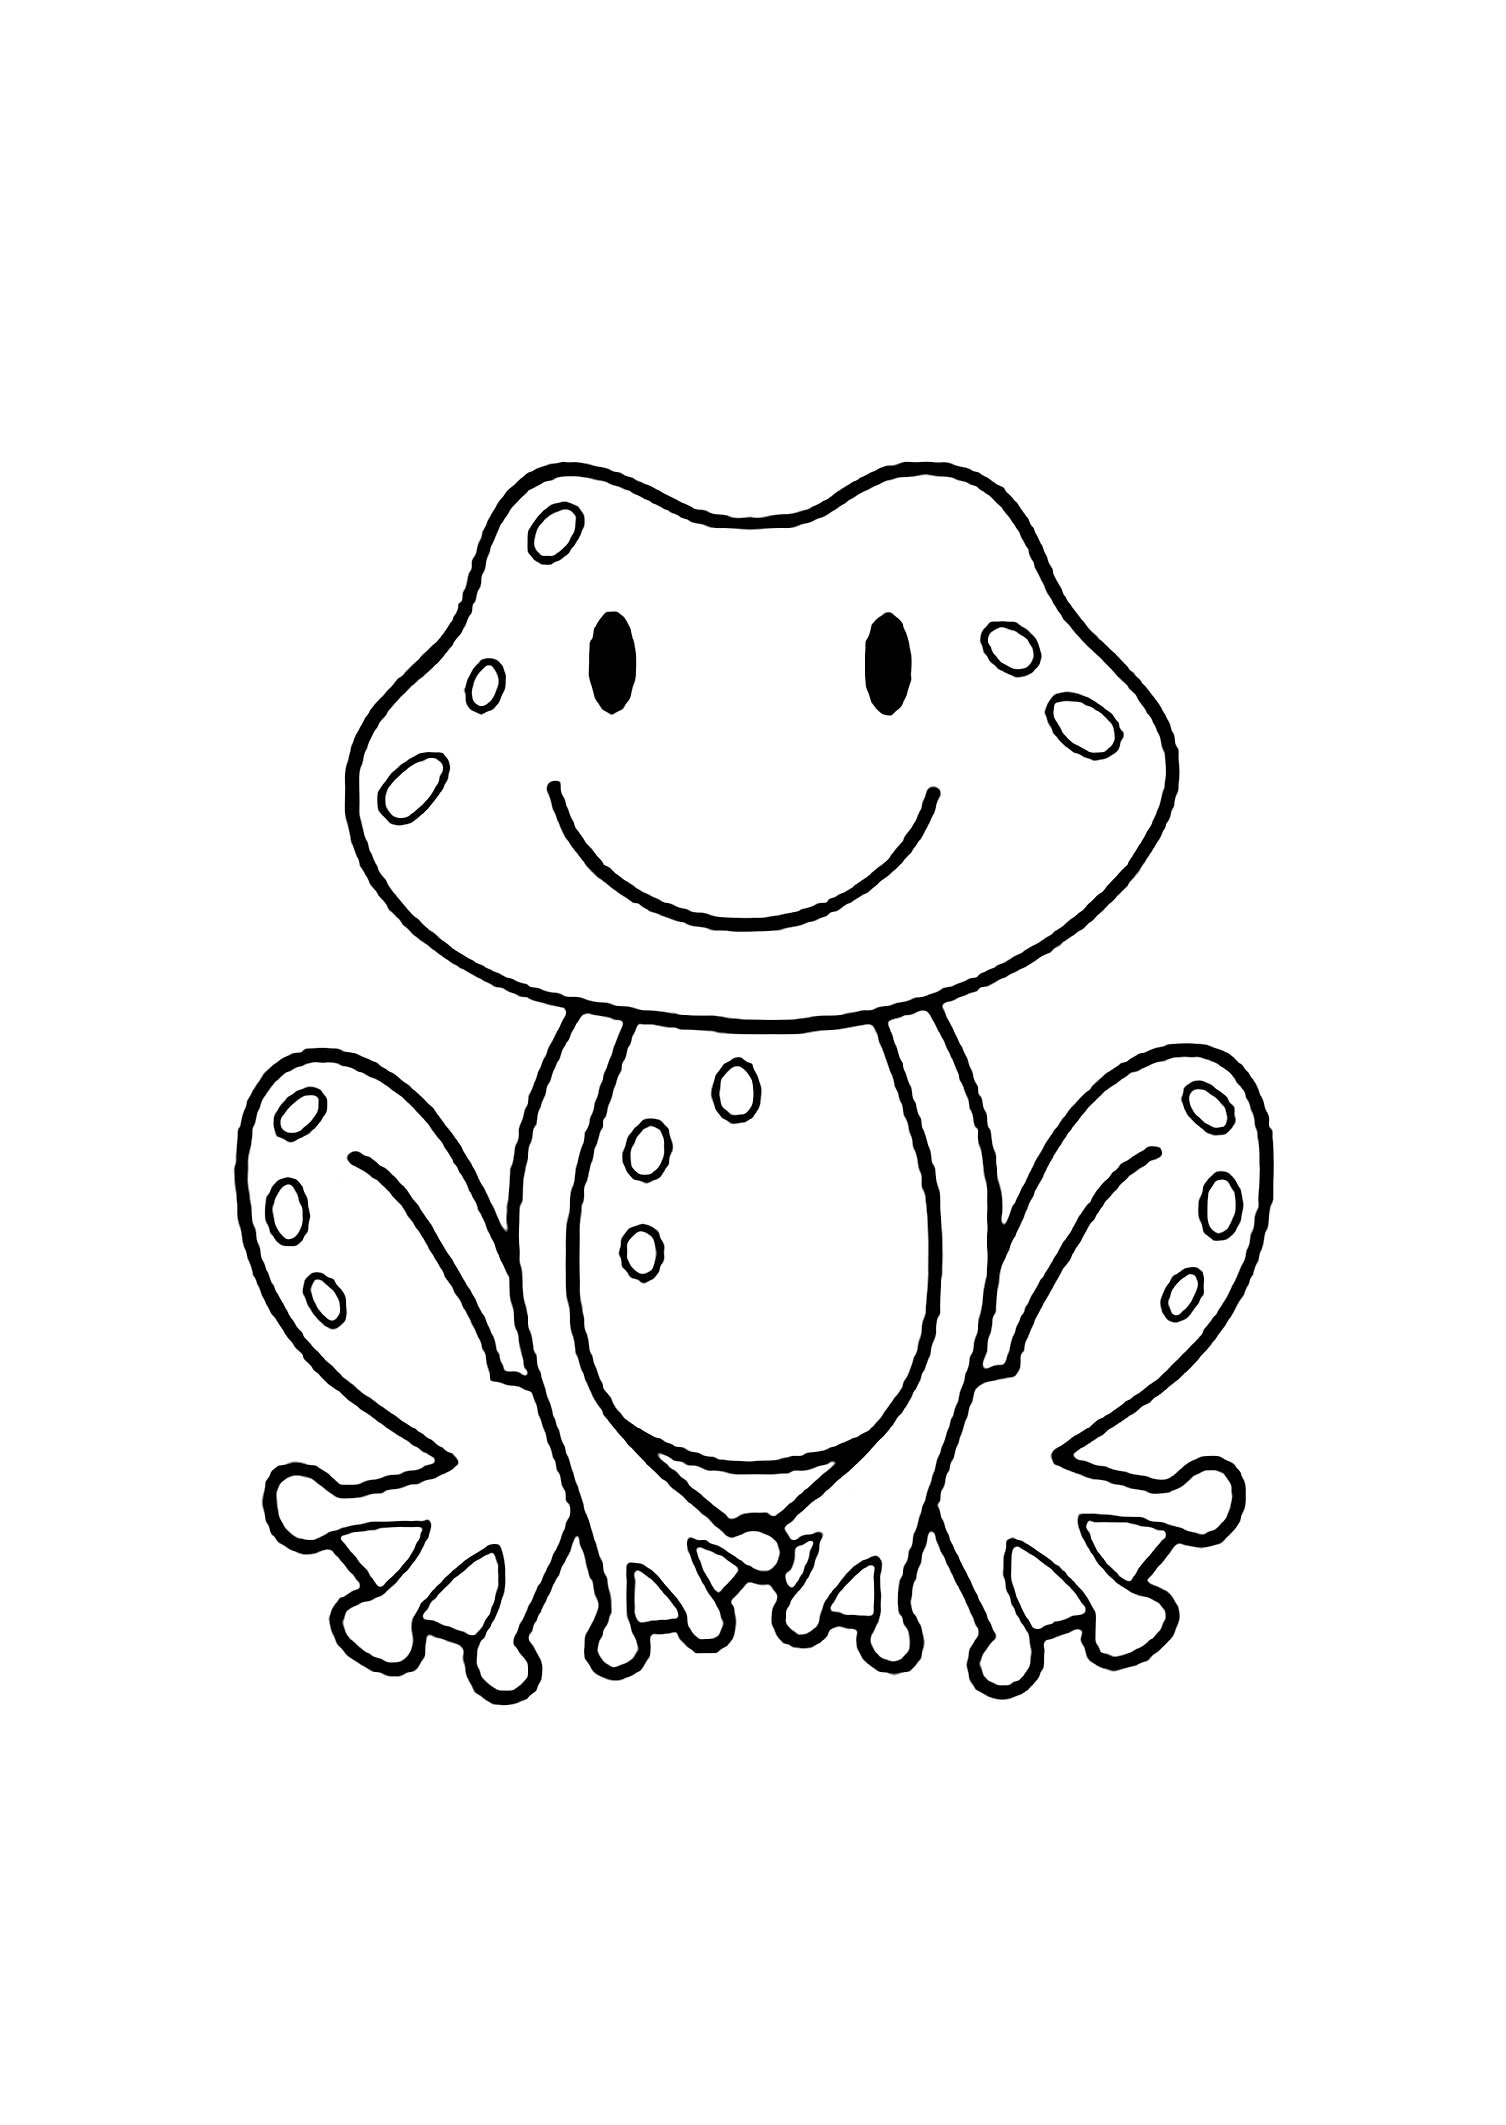 Frogs Free Printable Coloring Pages For Kids Frog Coloring Pages Easy